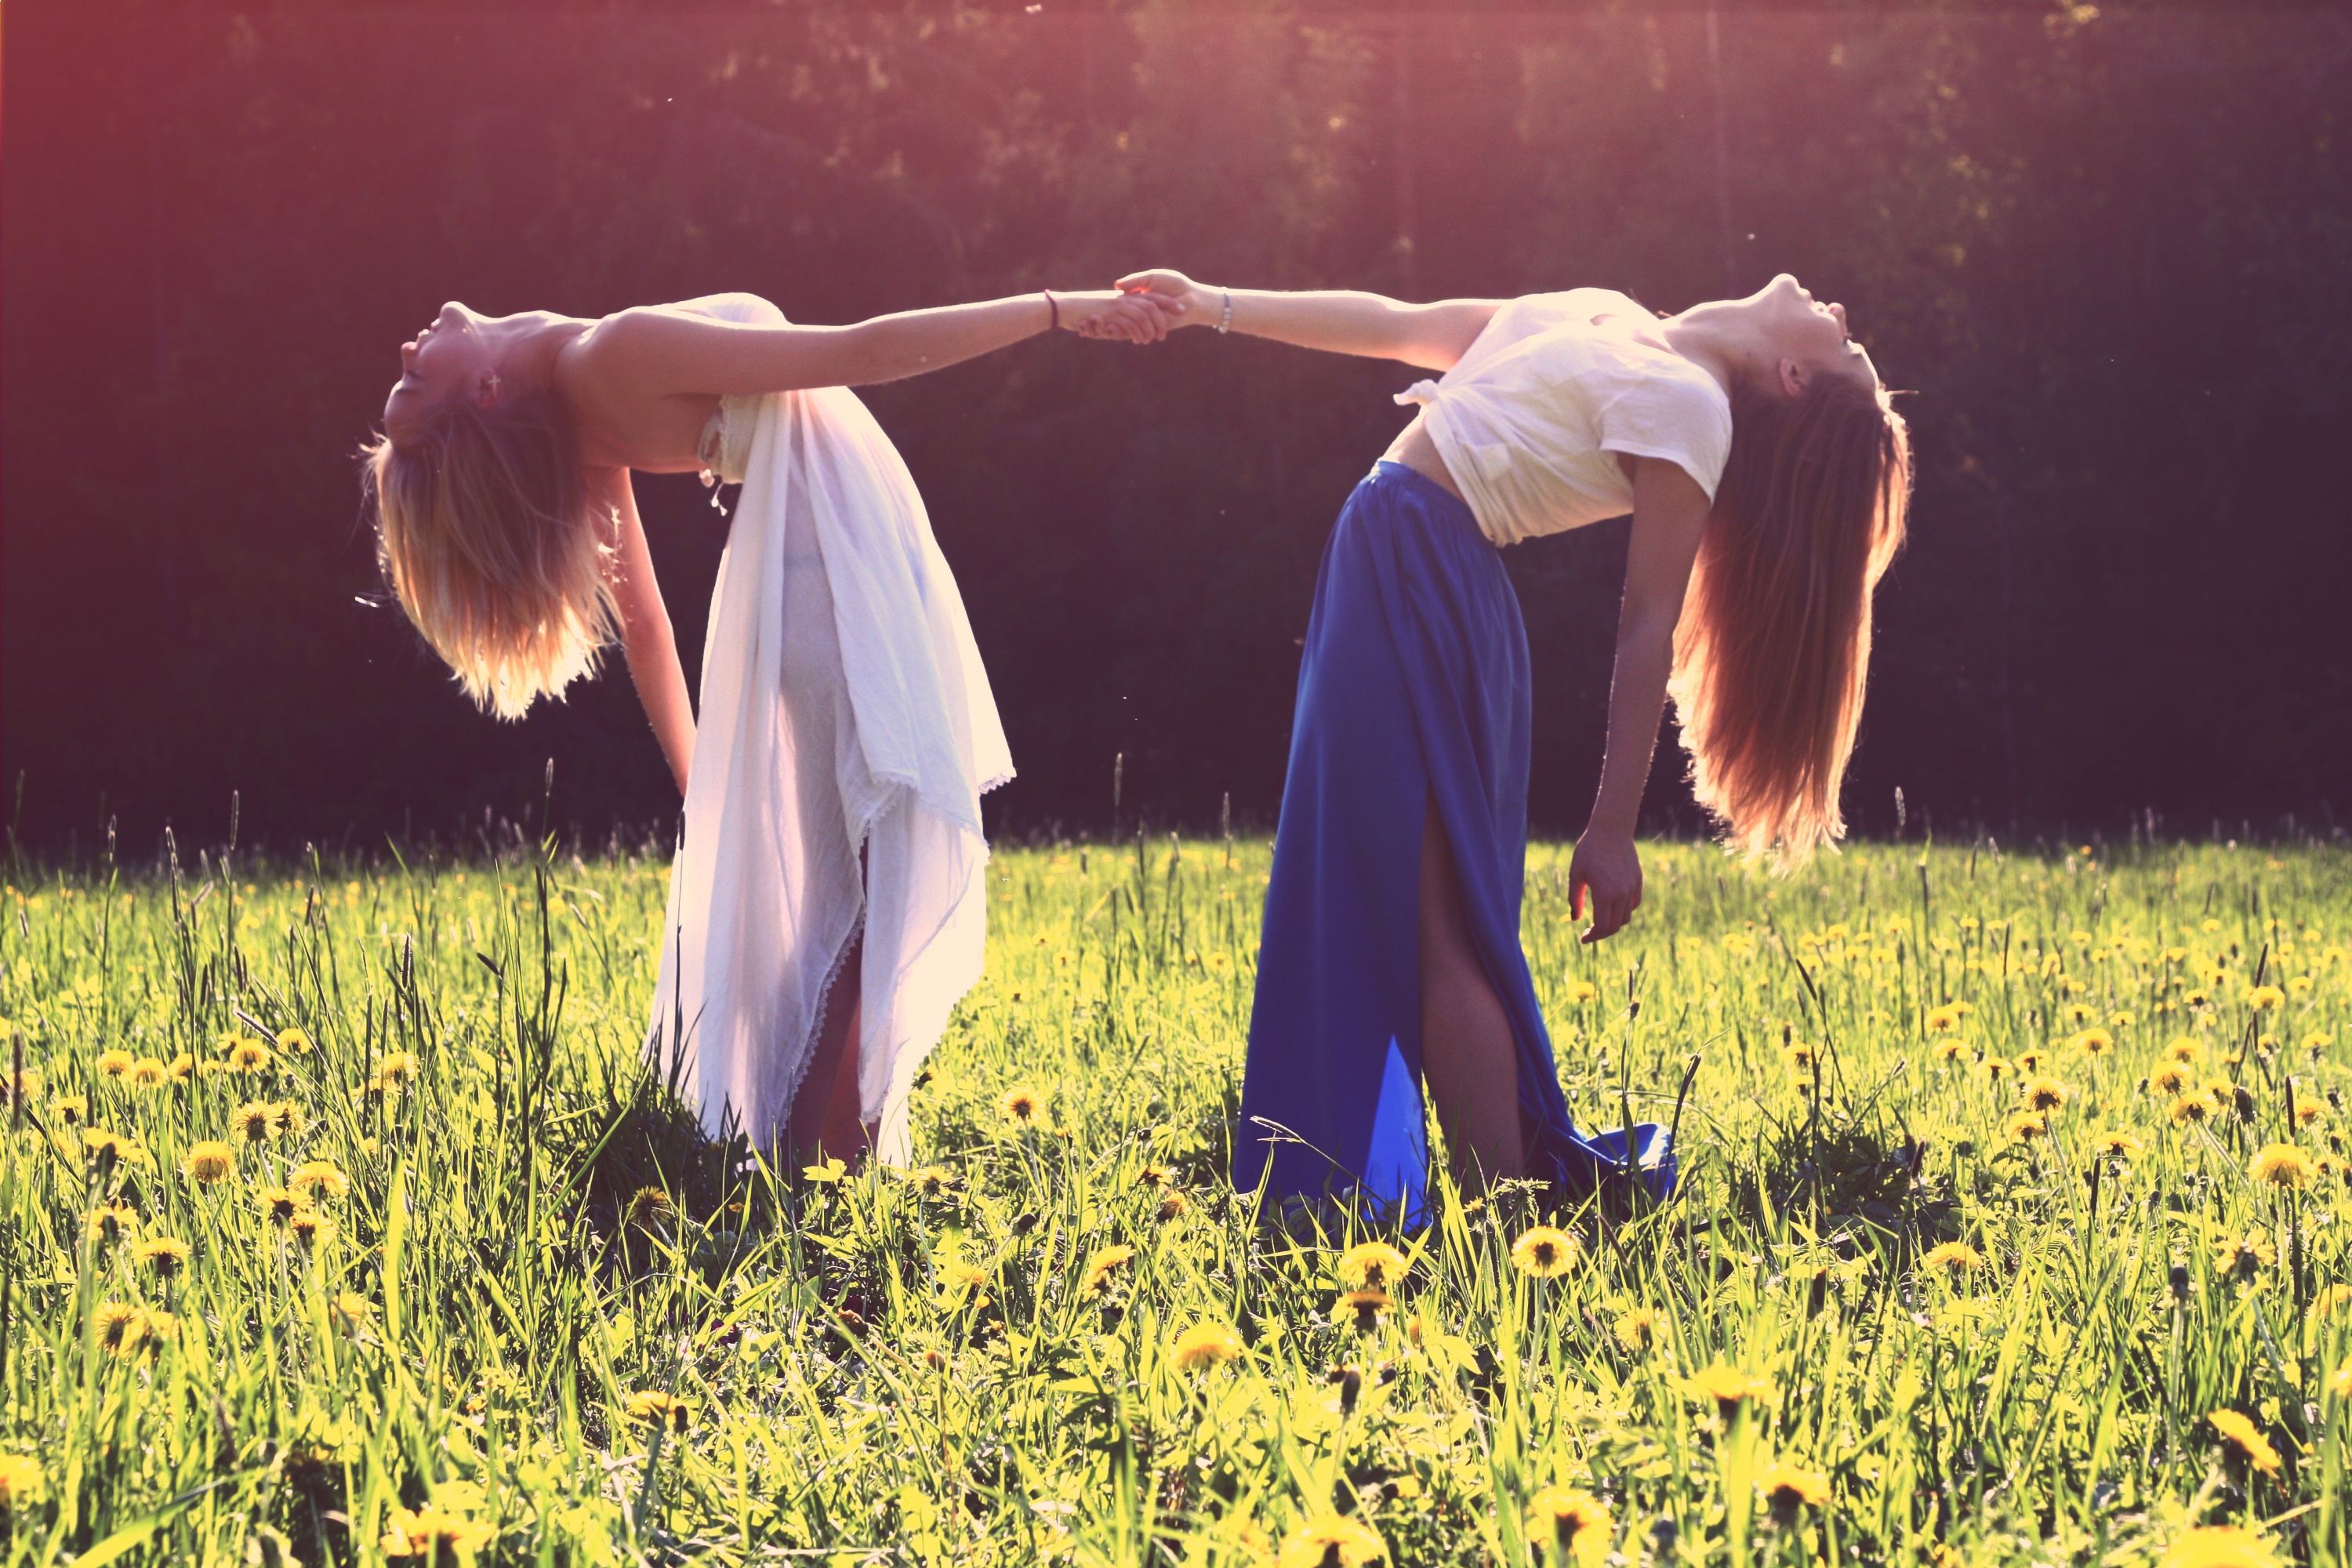 11 Reasons Friends Who Grew Up With You Will Stay With You Forever